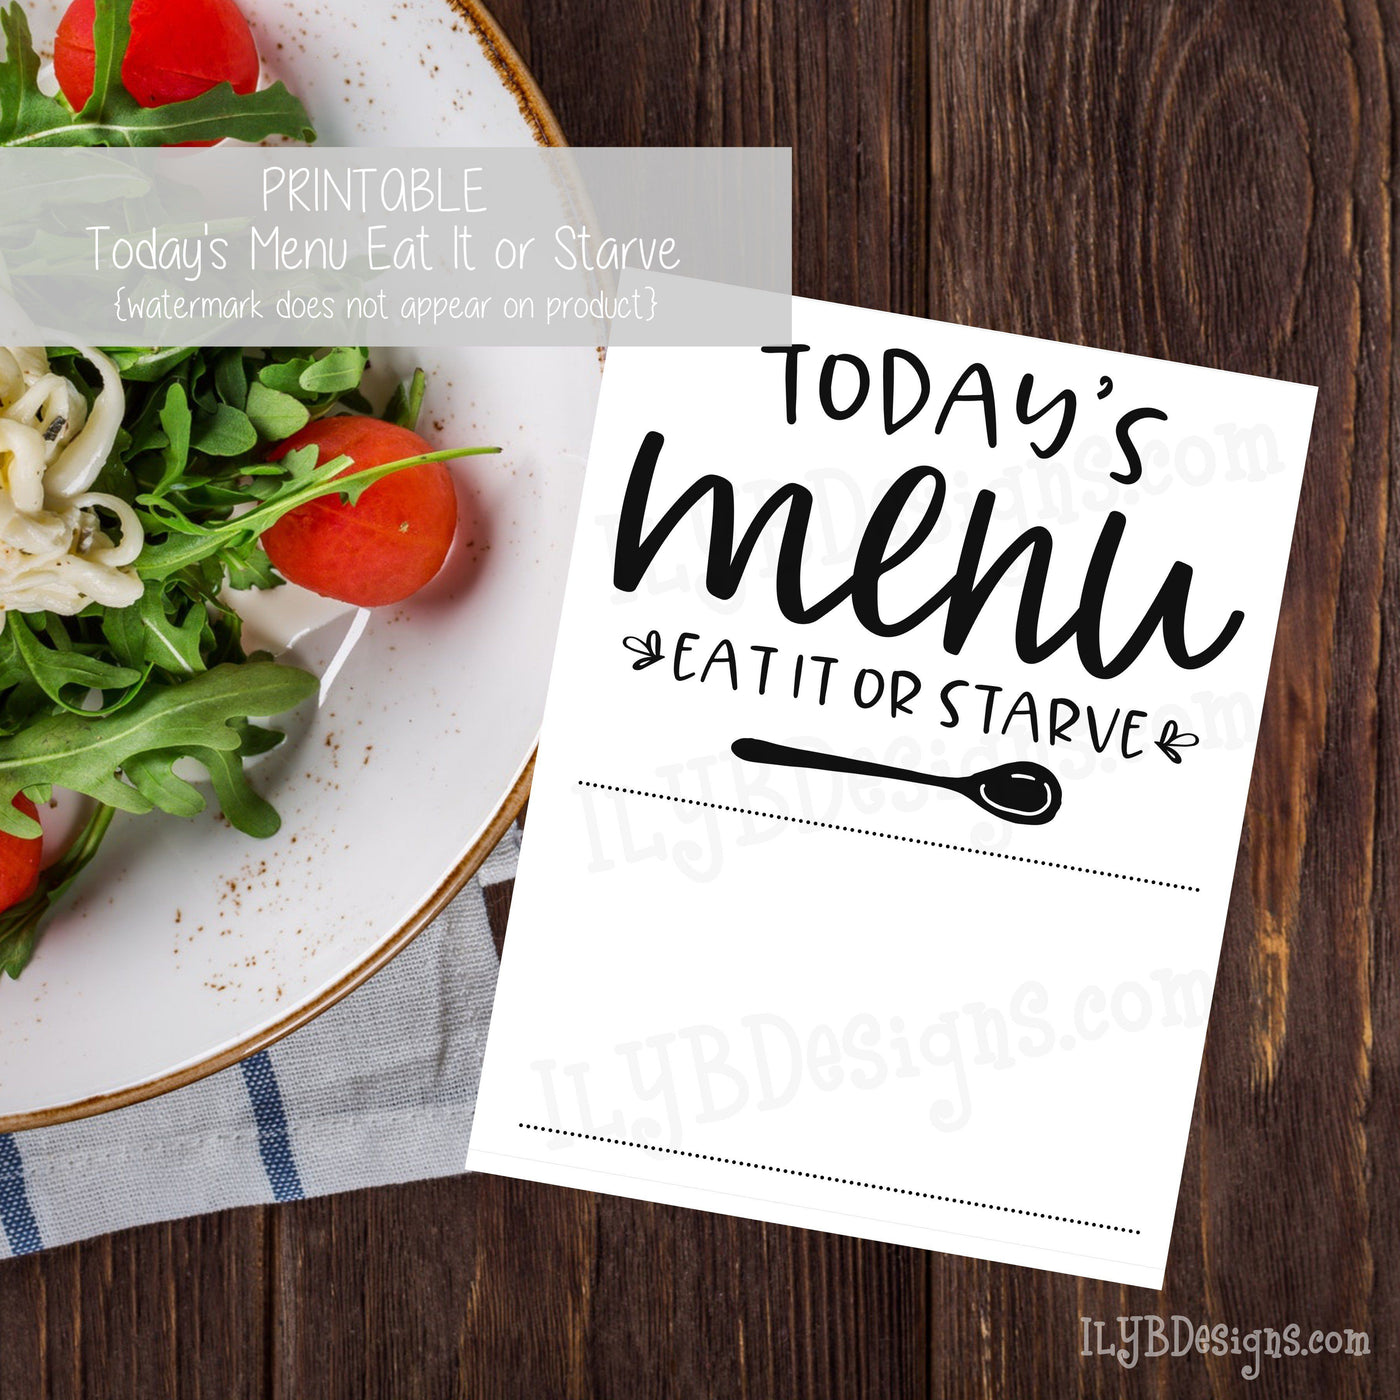 PRINTABLE Today's Menu Eat It or Starve